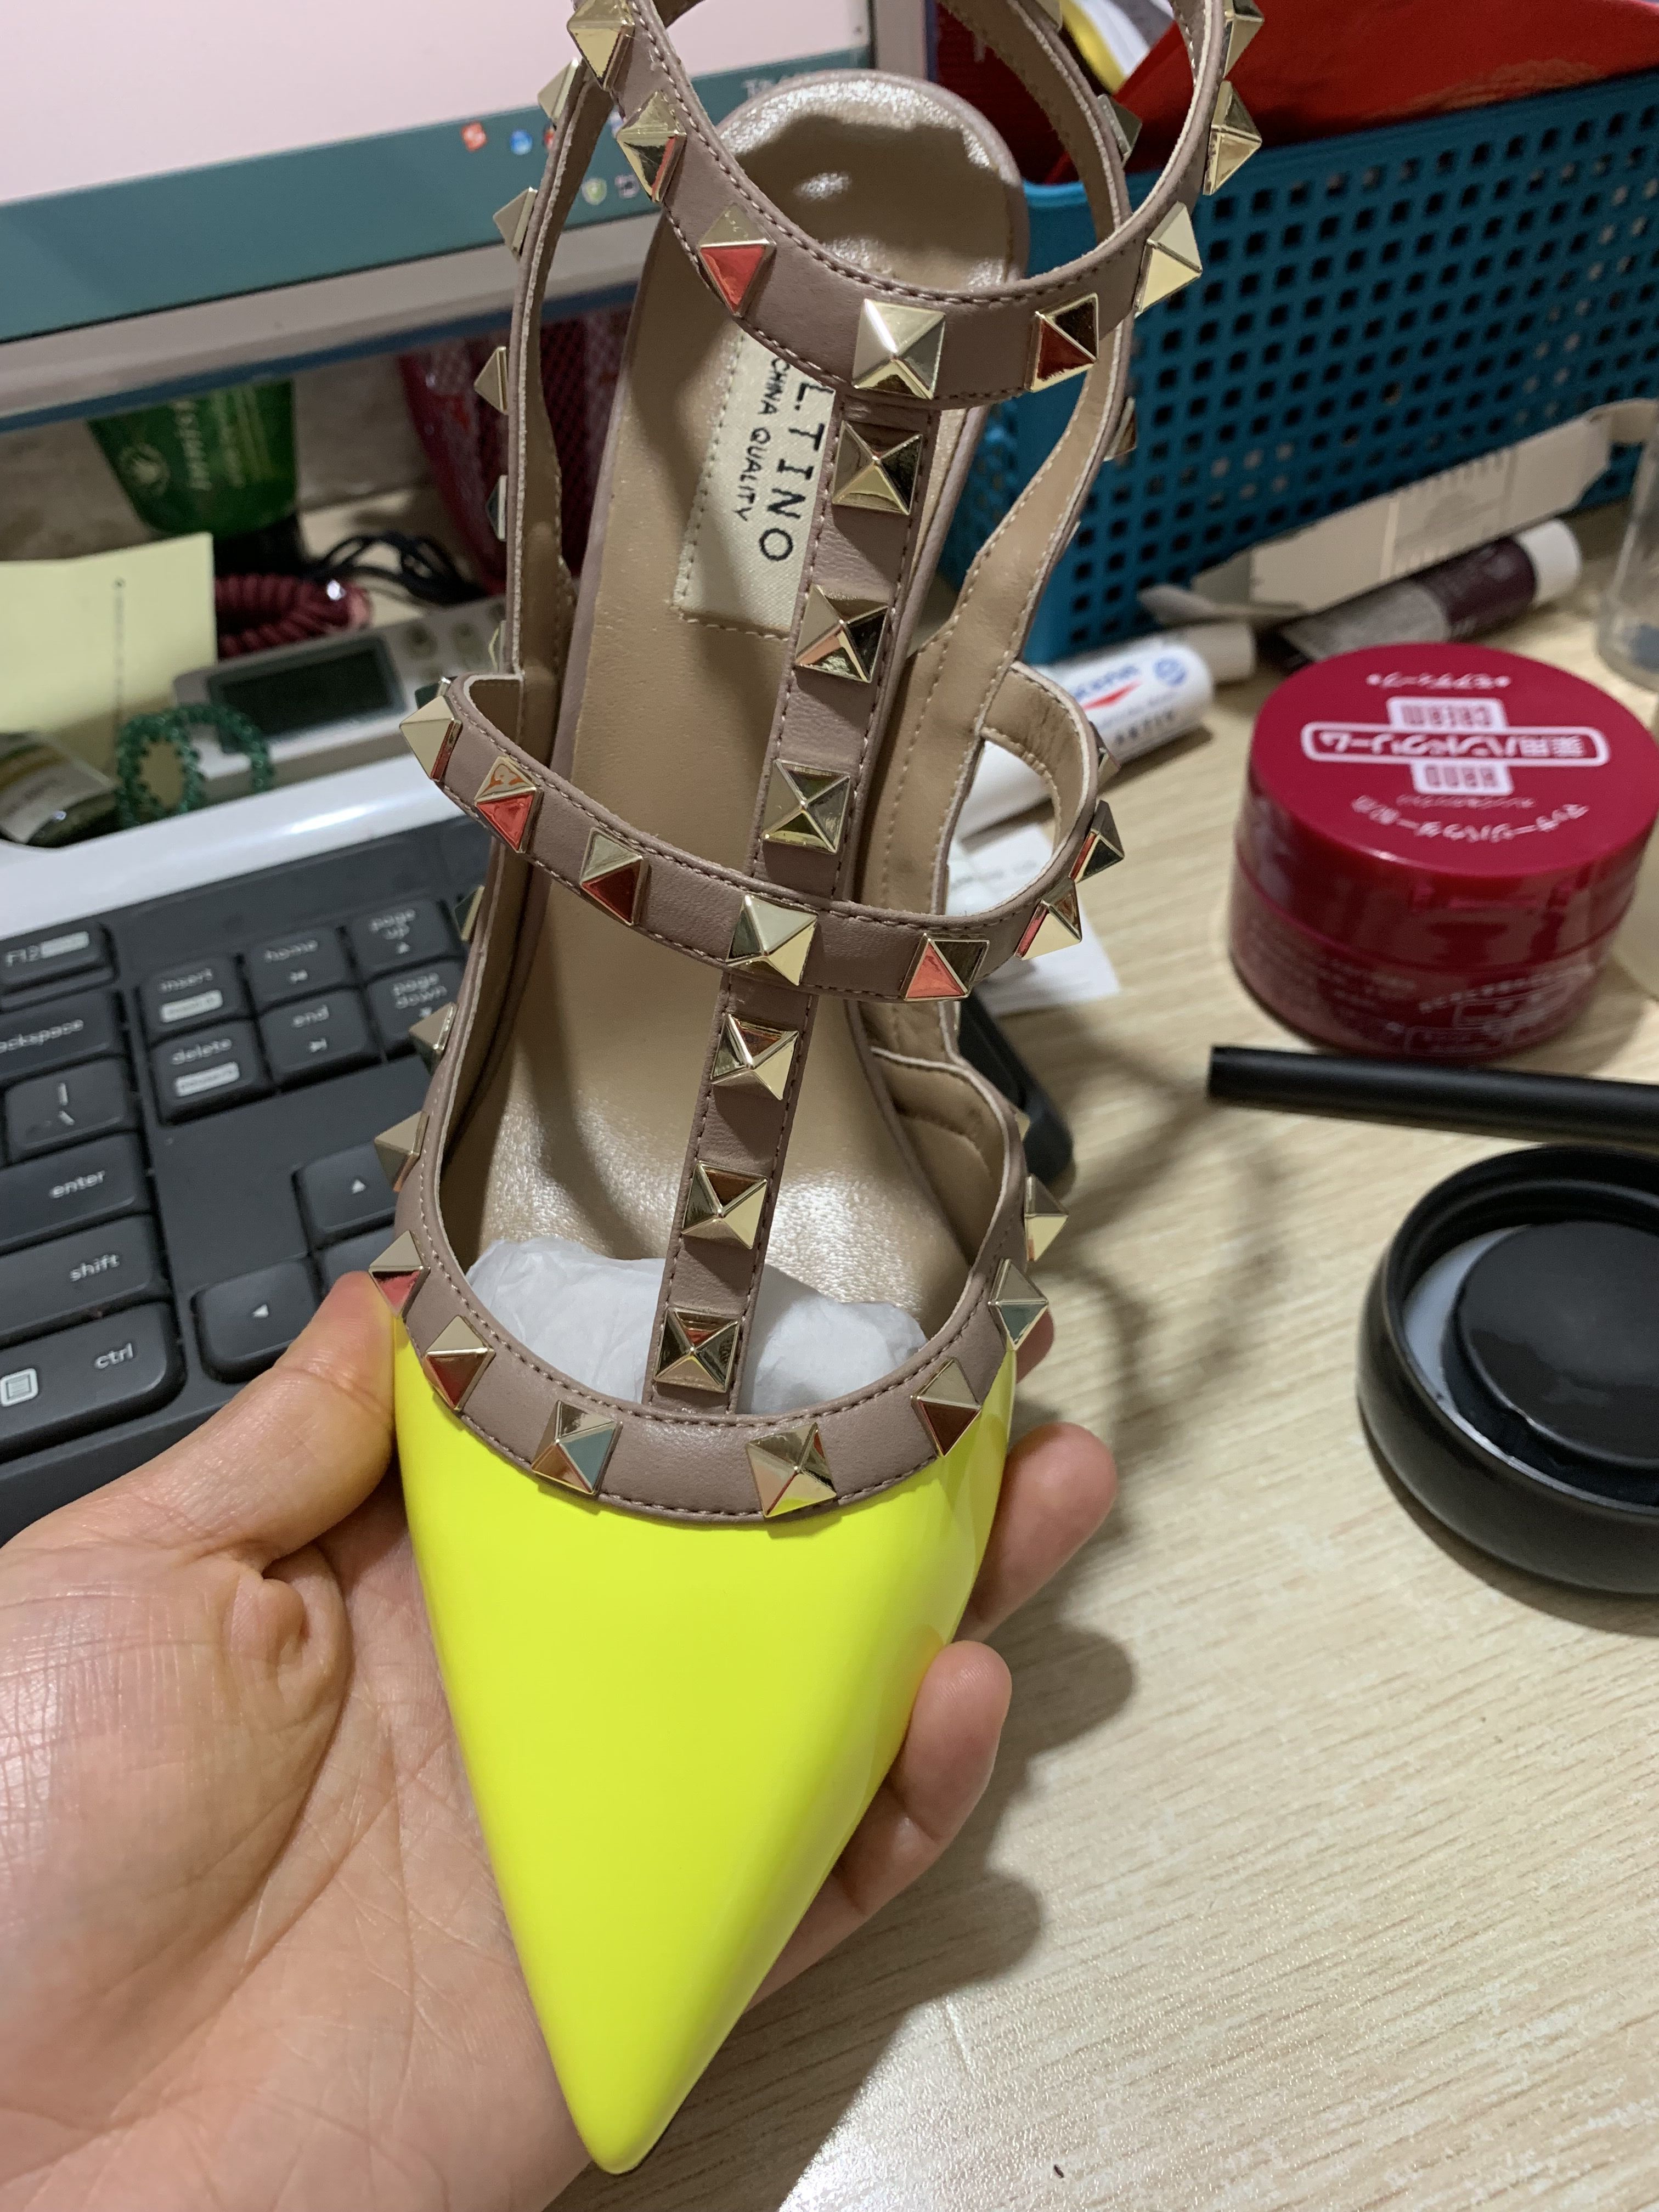 

Casual Designer Sexy lady fashion women pumps neon patent leather spikes wrap strappy slingback high Heels sandals shoes Stiletto 9.5cm, Yelow 9.5cm